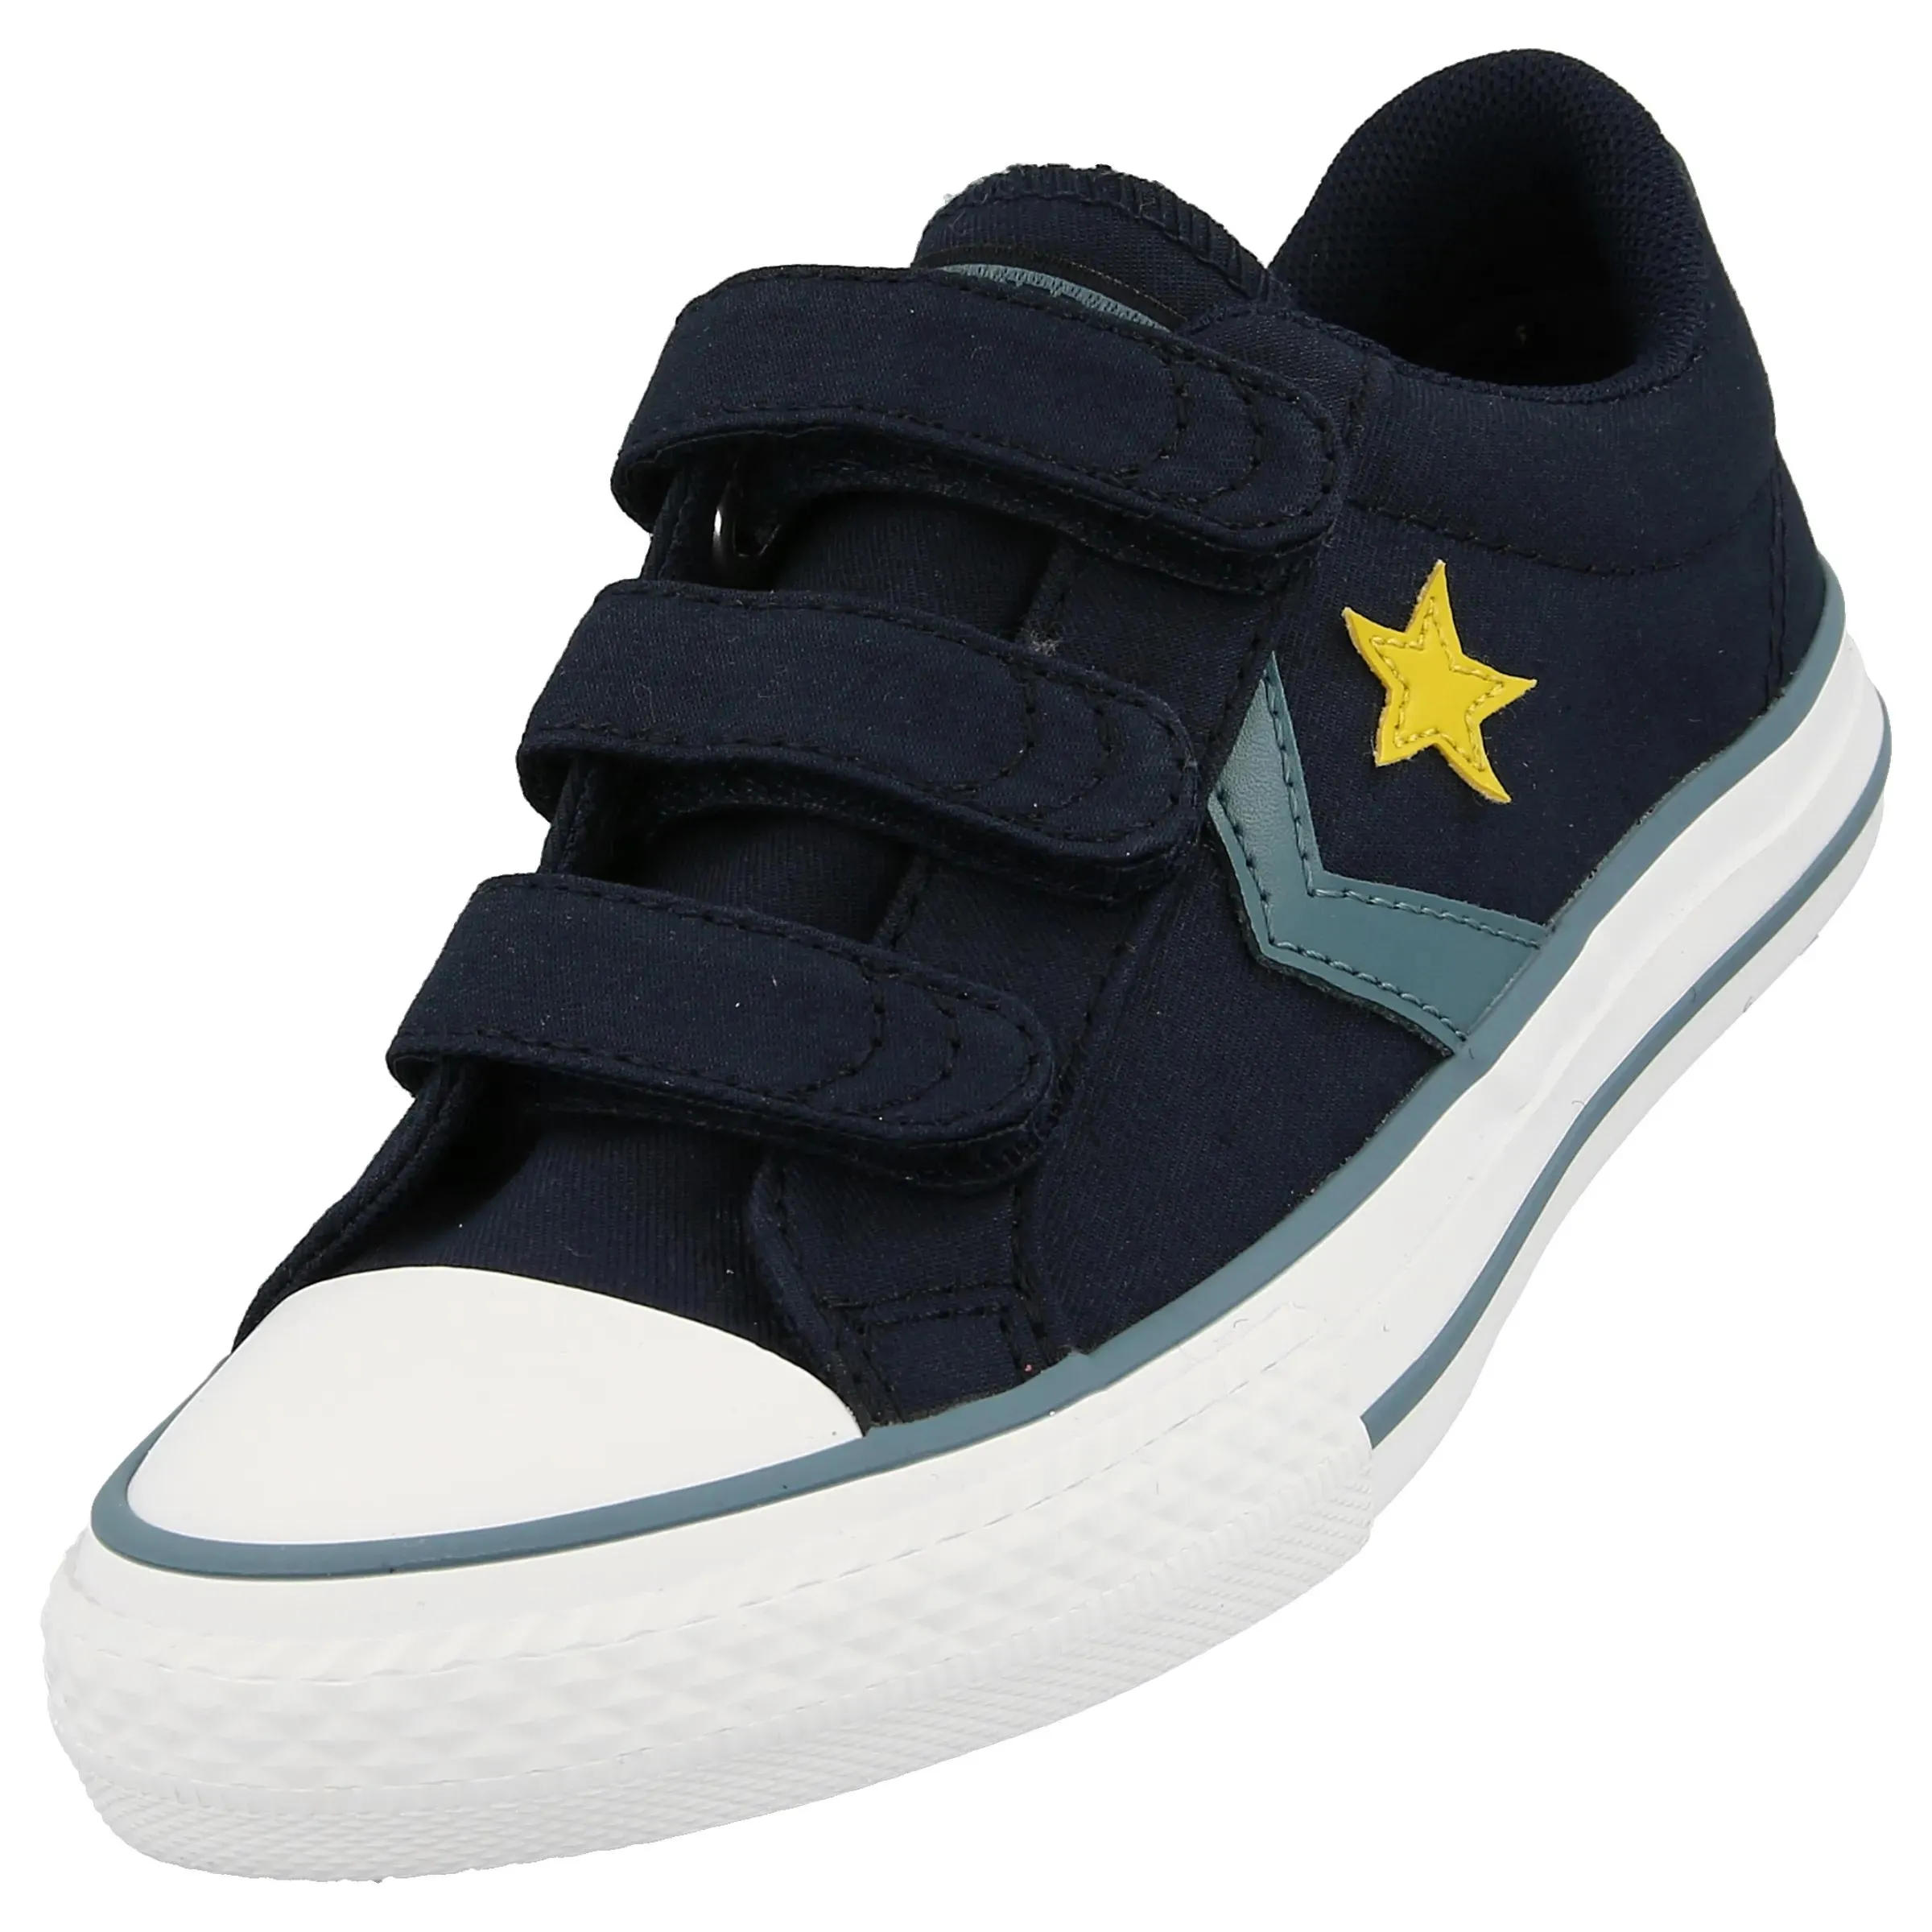 Converse Tenisice Star Player 3V 